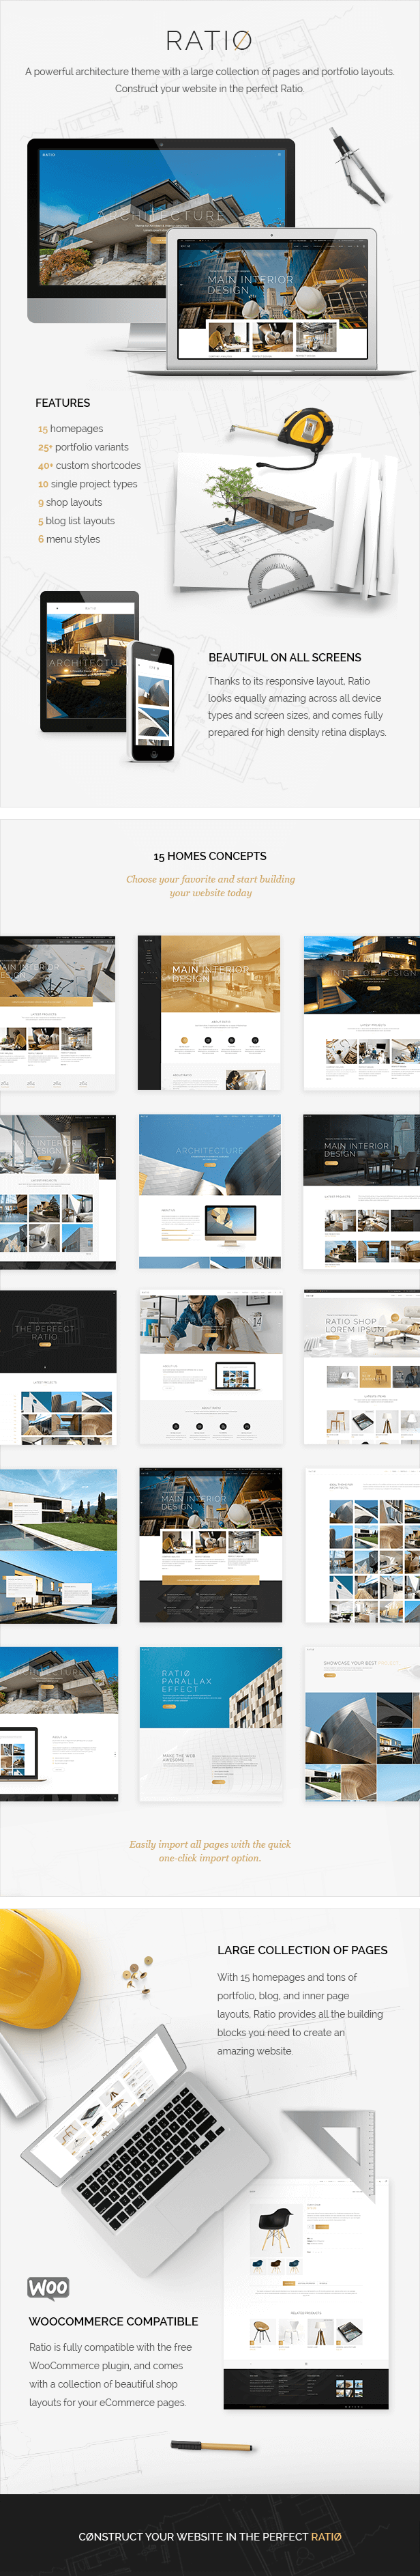 01 - Ratio - A Powerful Interior Design and Architecture Theme